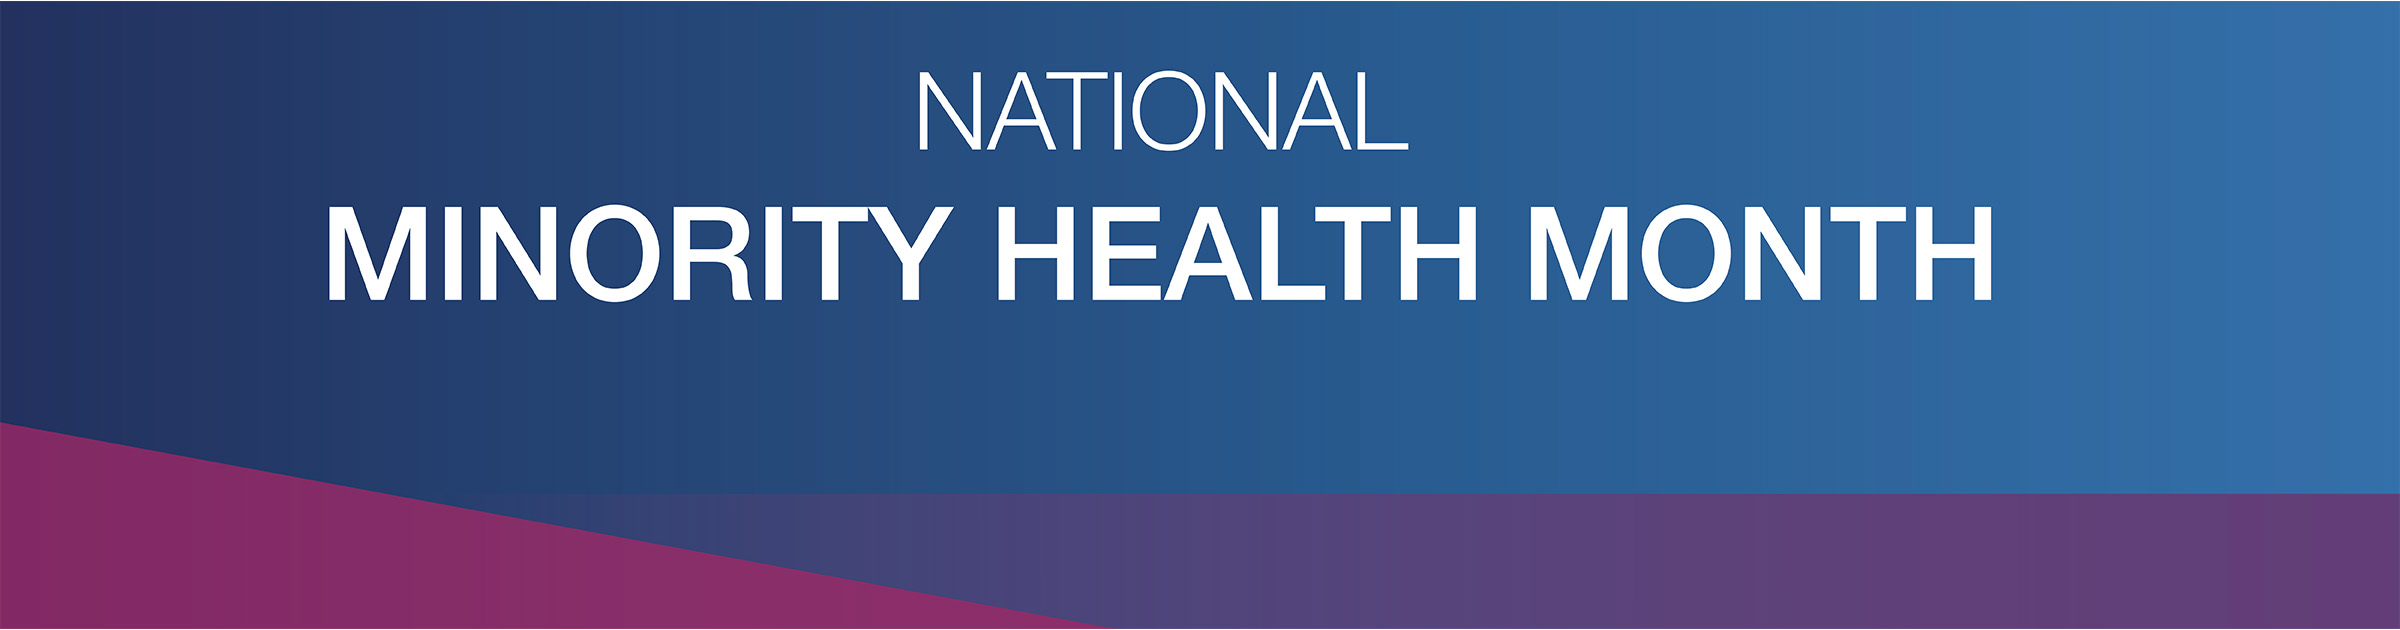 National Minority Health Month in white letters on a blue and purple background